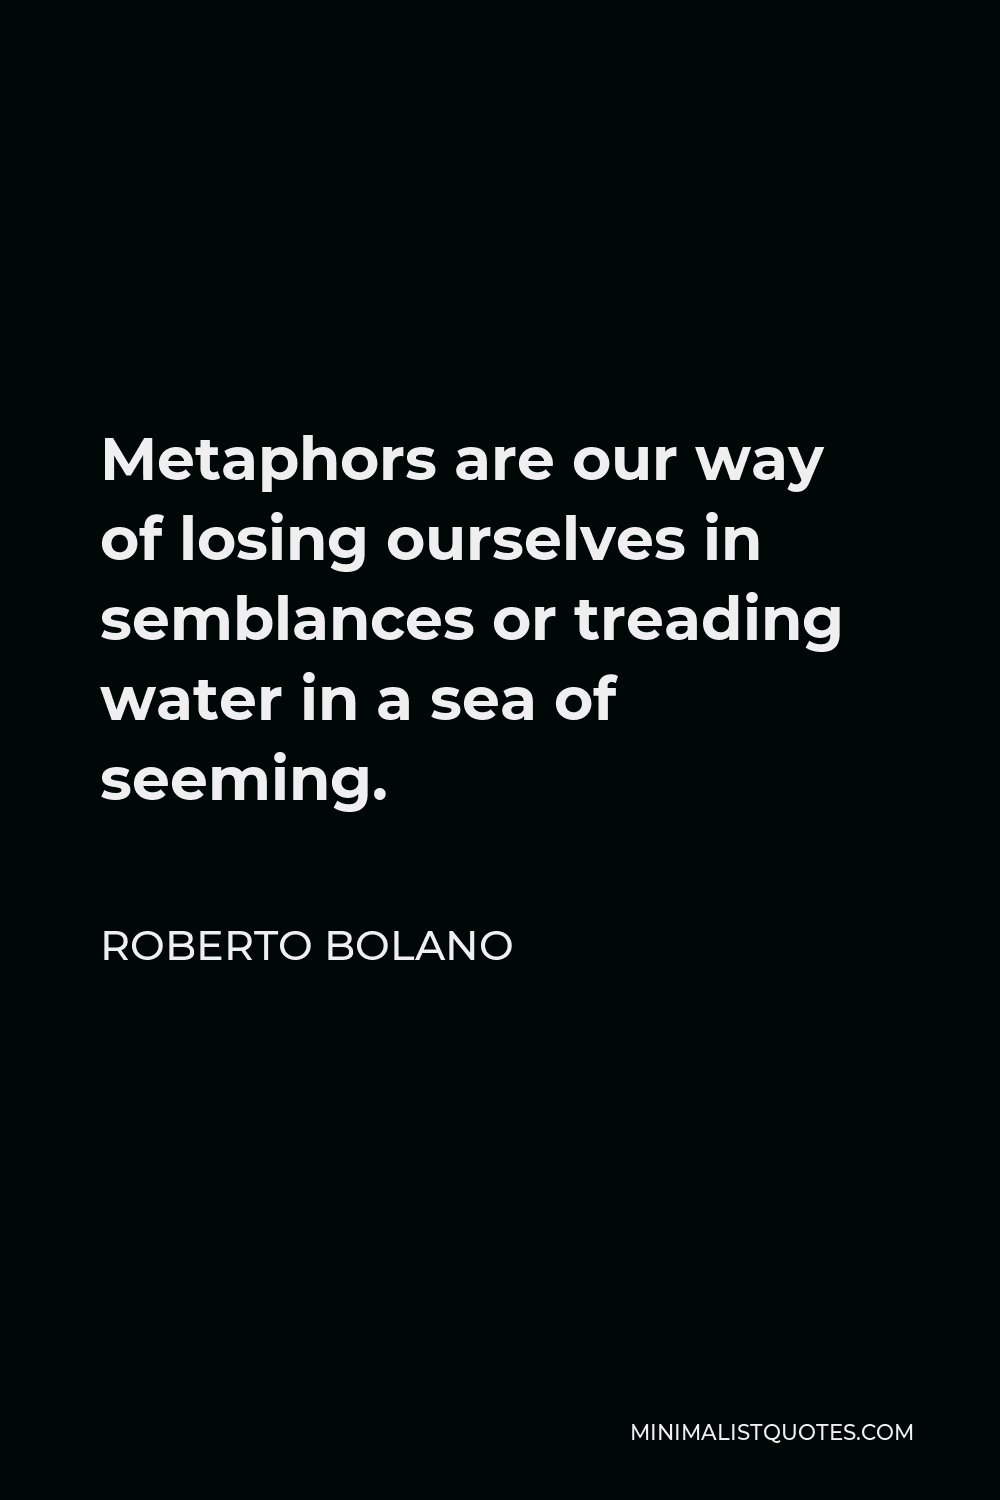 Roberto Bolano Quote - Metaphors are our way of losing ourselves in semblances or treading water in a sea of seeming.